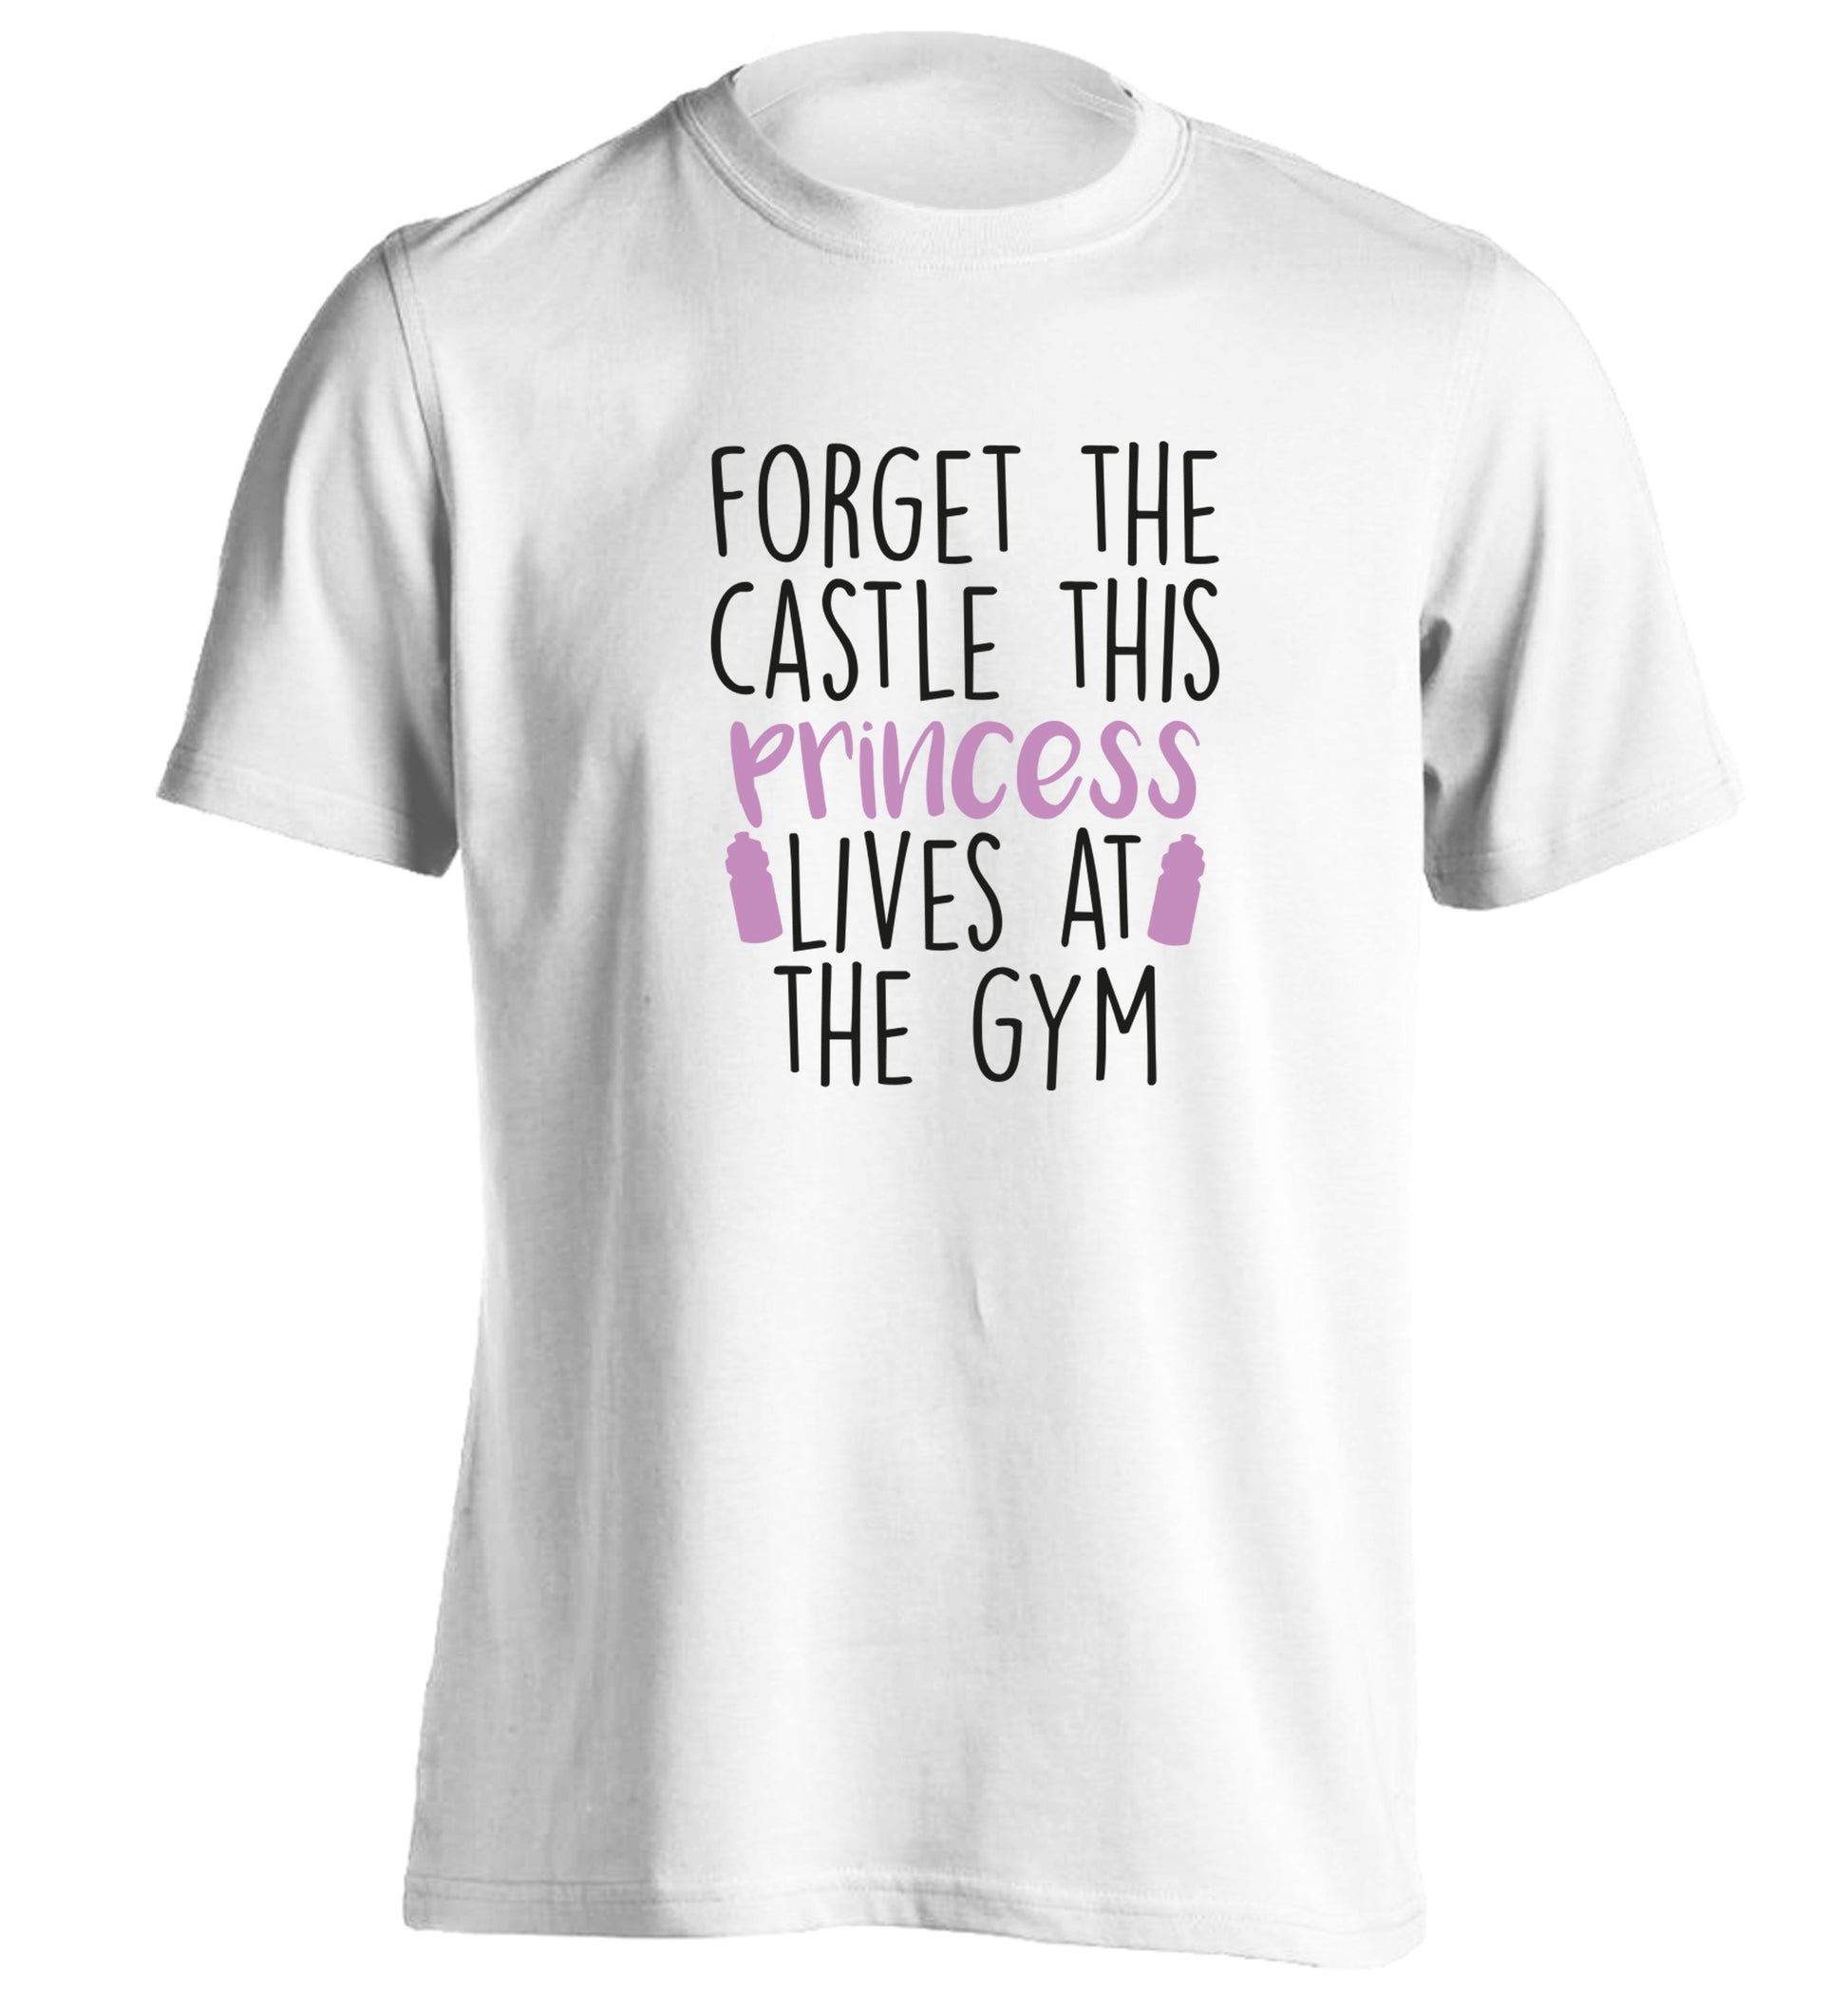 Forget the castle this princess lives at the gym adults unisex white Tshirt 2XL